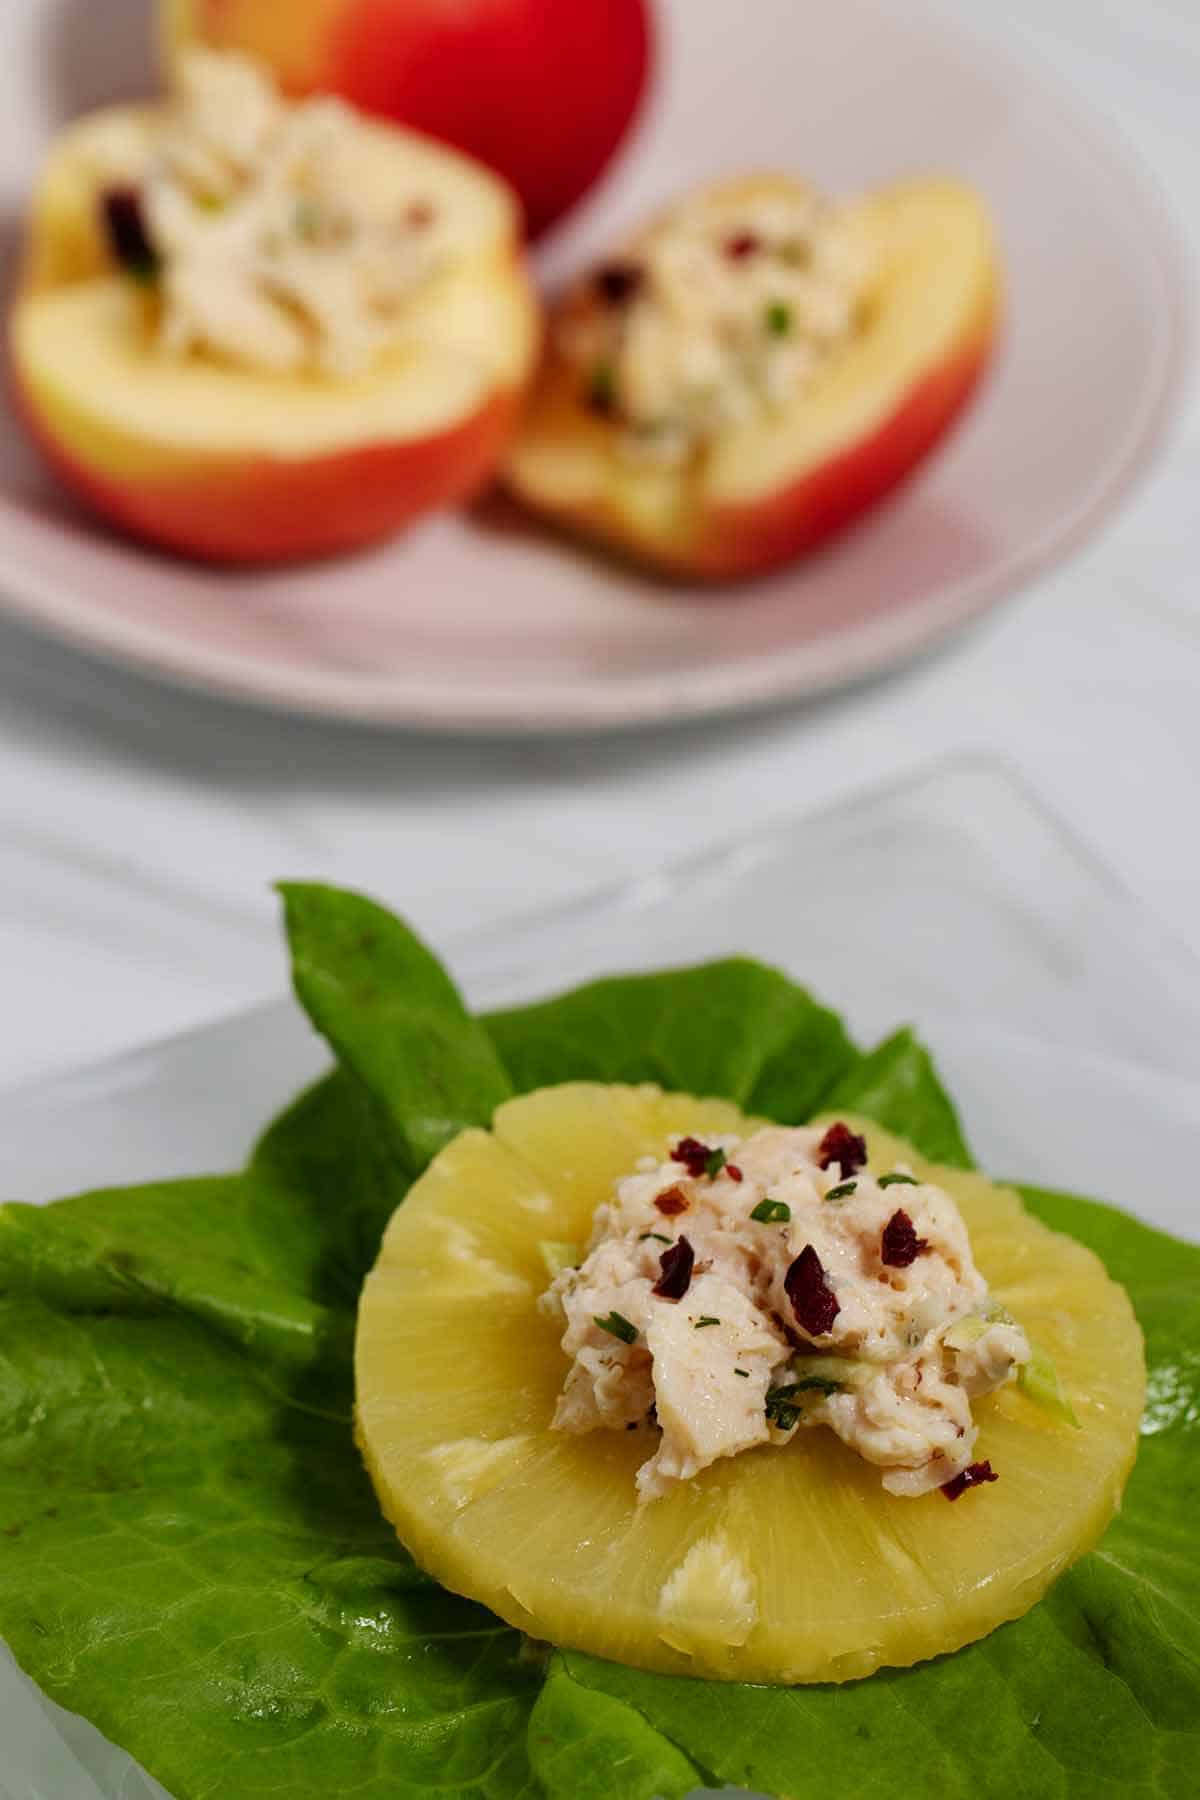 Chicken salad in a pinepple ring with stuffed apples in the back.